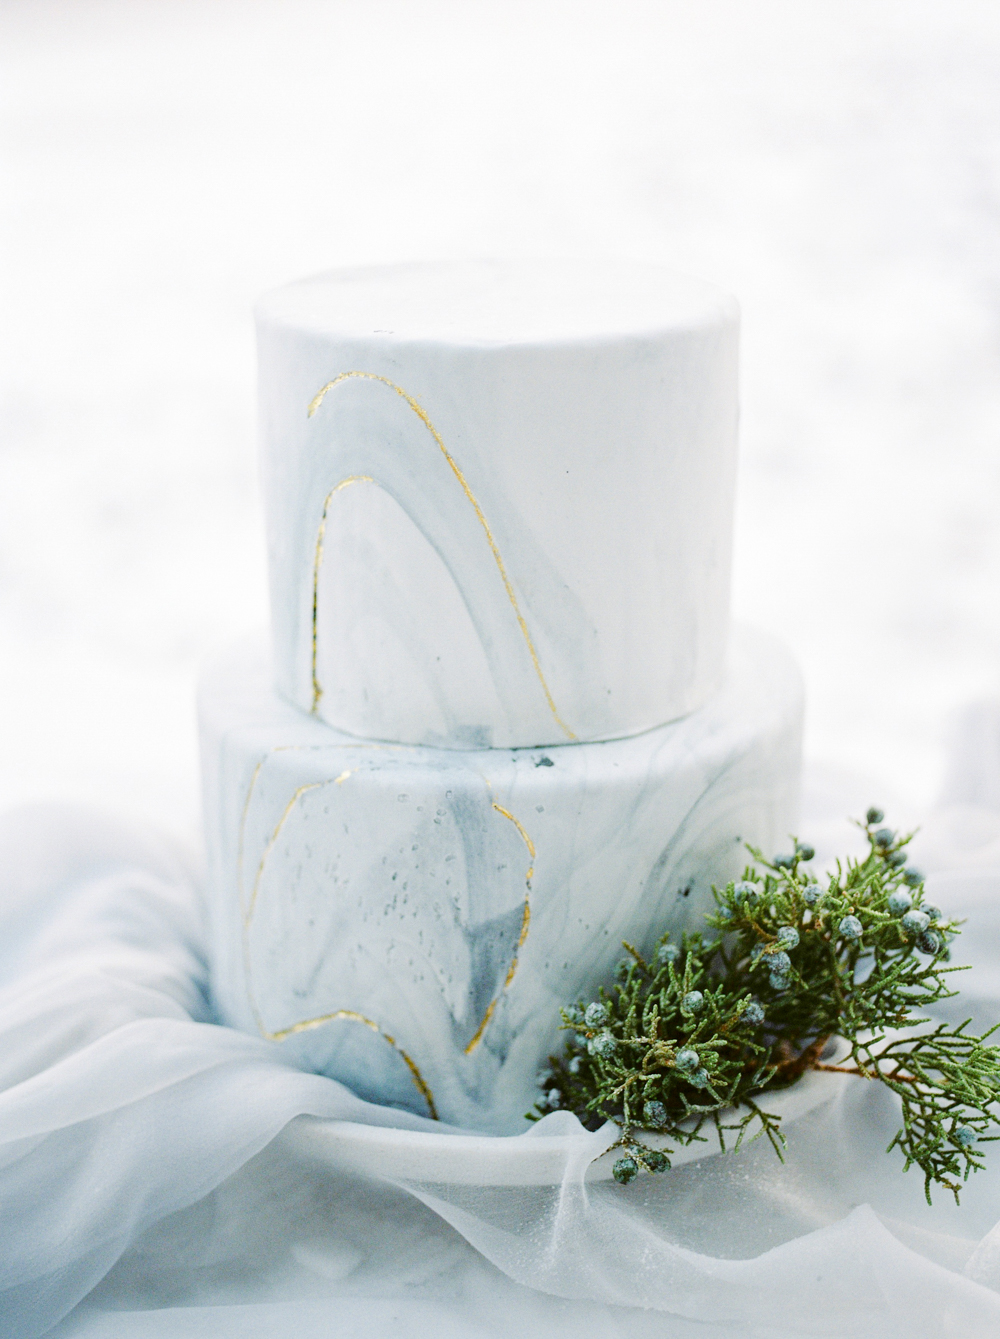 Dreamy marbled blue wedding cake with gold veins